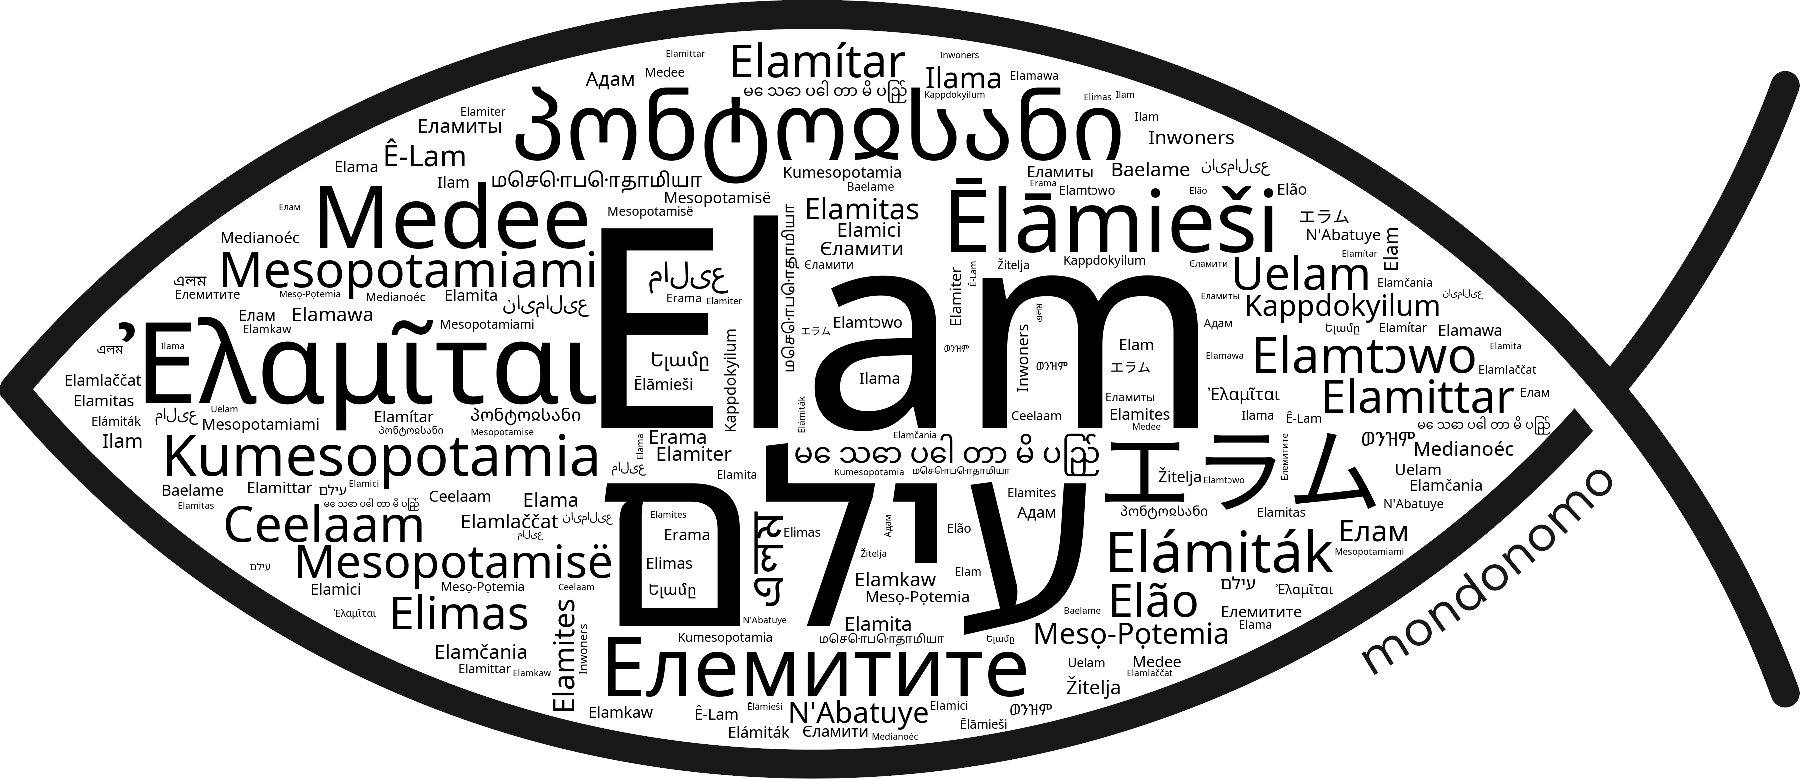 Name Elam in the world's Bibles